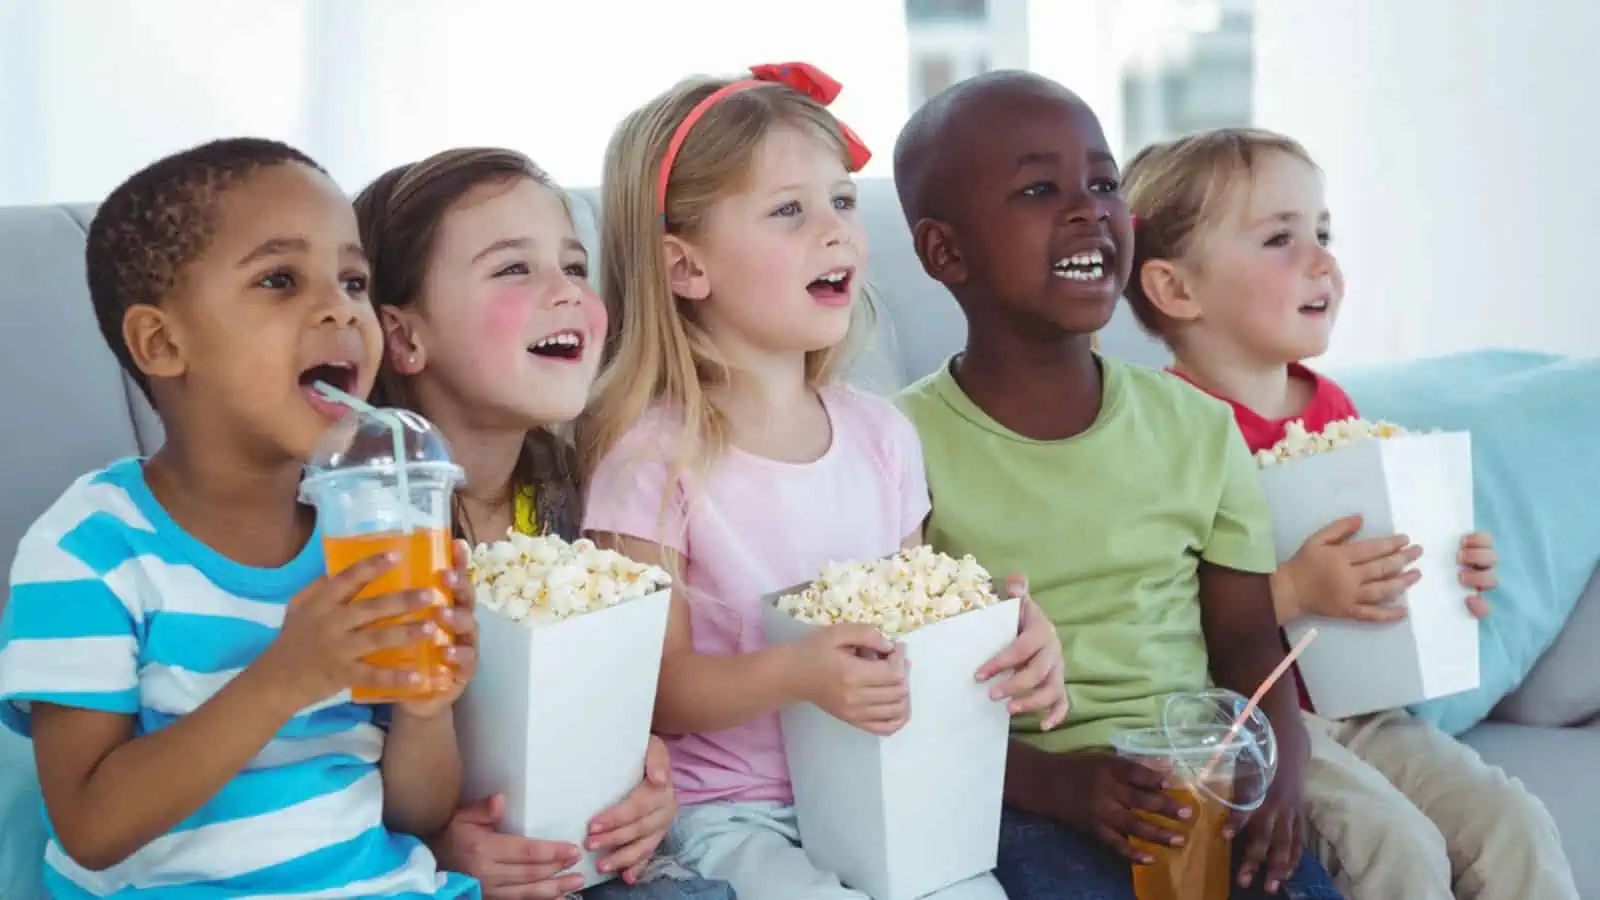 kids watching a movie with popcorn and drinks happy